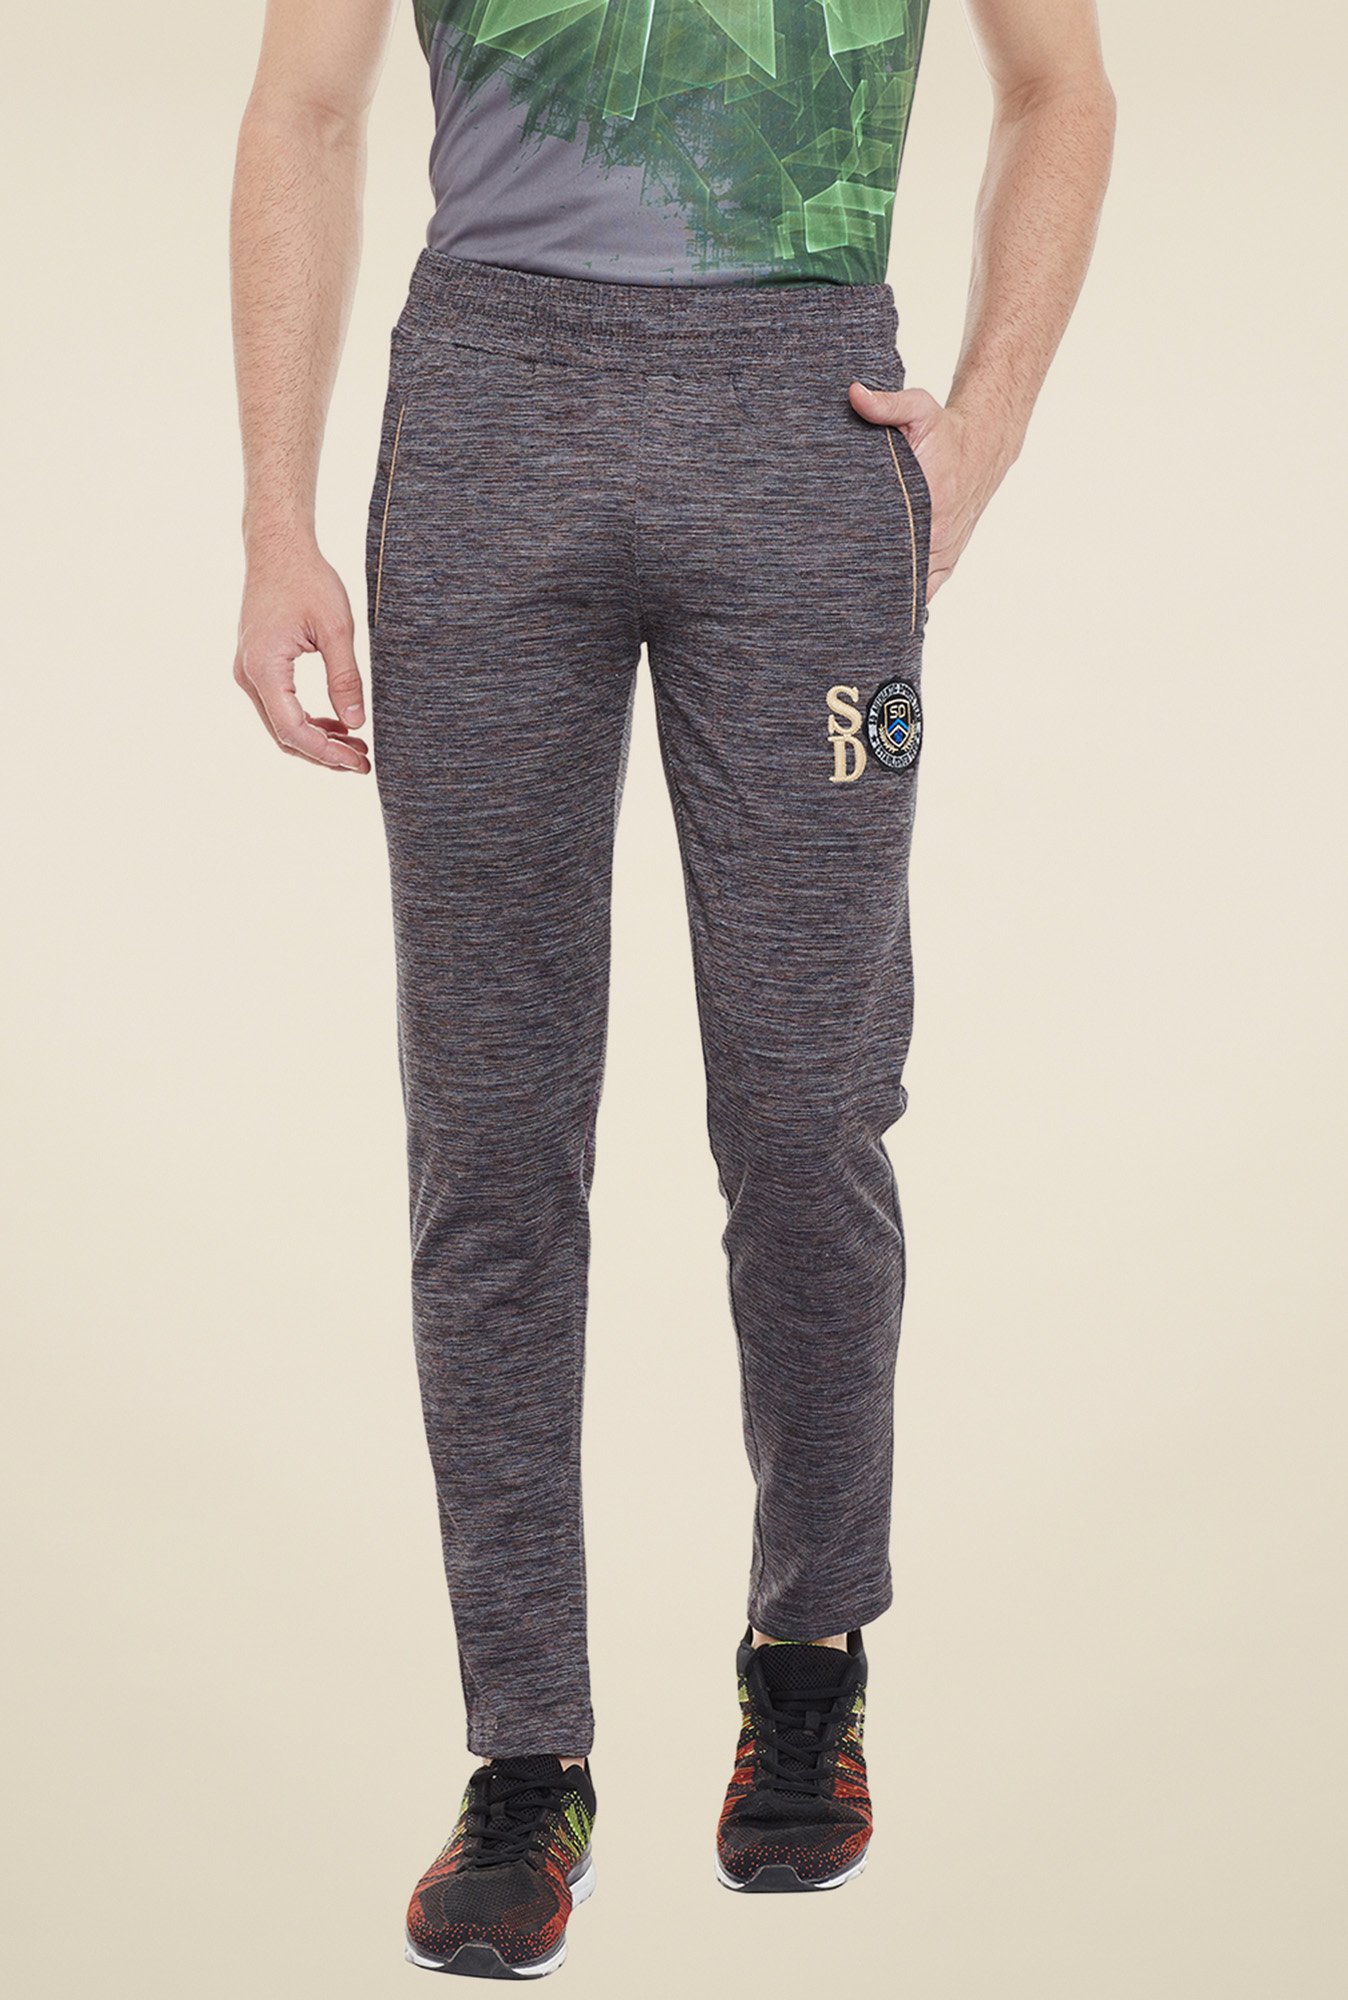 RUF AND TUF Solid Men Black Track Pants  Buy RUF AND TUF Solid Men Black Track  Pants Online at Best Prices in India  Flipkartcom